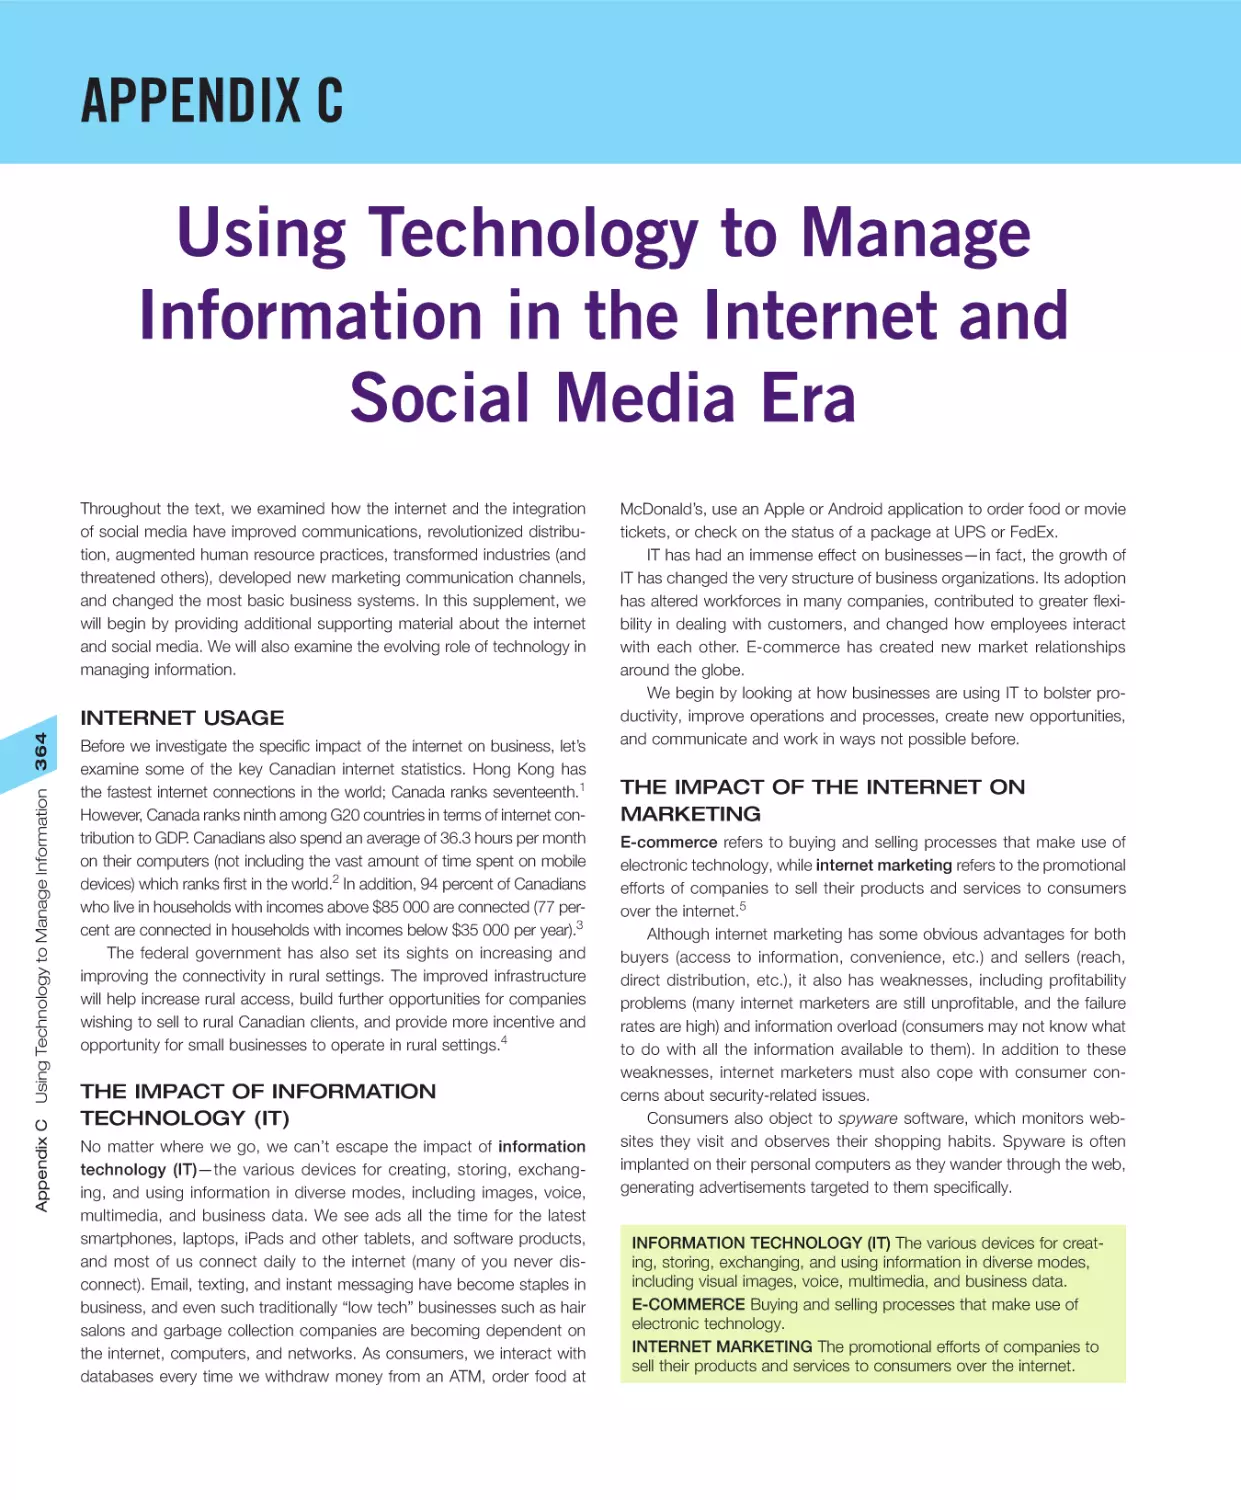 Appendix C Using Technology to Manage Information in the Internet and Social Media Era